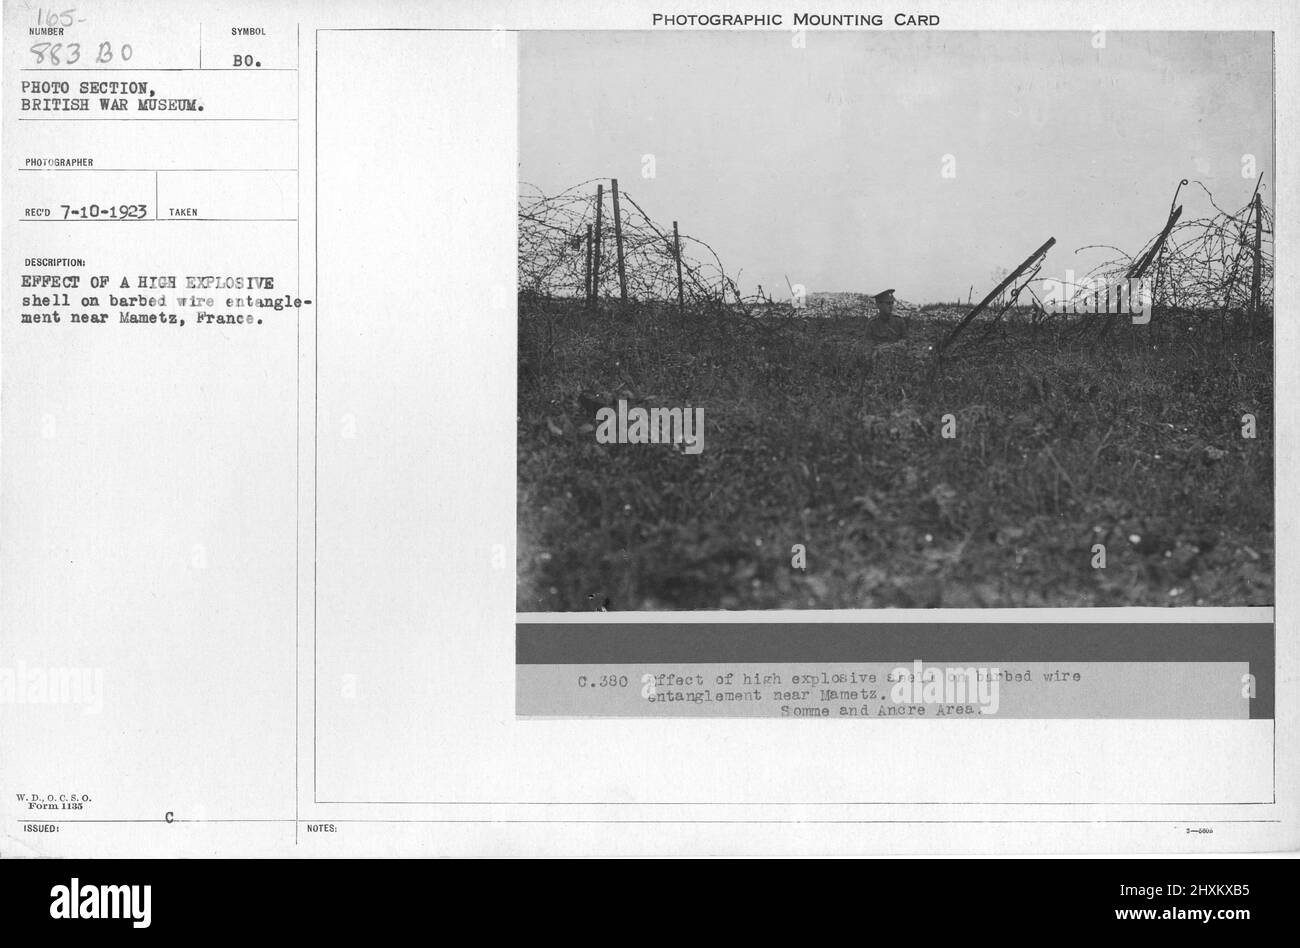 Effect of high explosive shell on barbed wire entanglement near Mametz, France. Collection of World War I Photographs, 1914-1918 that depict the military activities of British and other nation's armed forces and personnel during World War I. Stock Photo